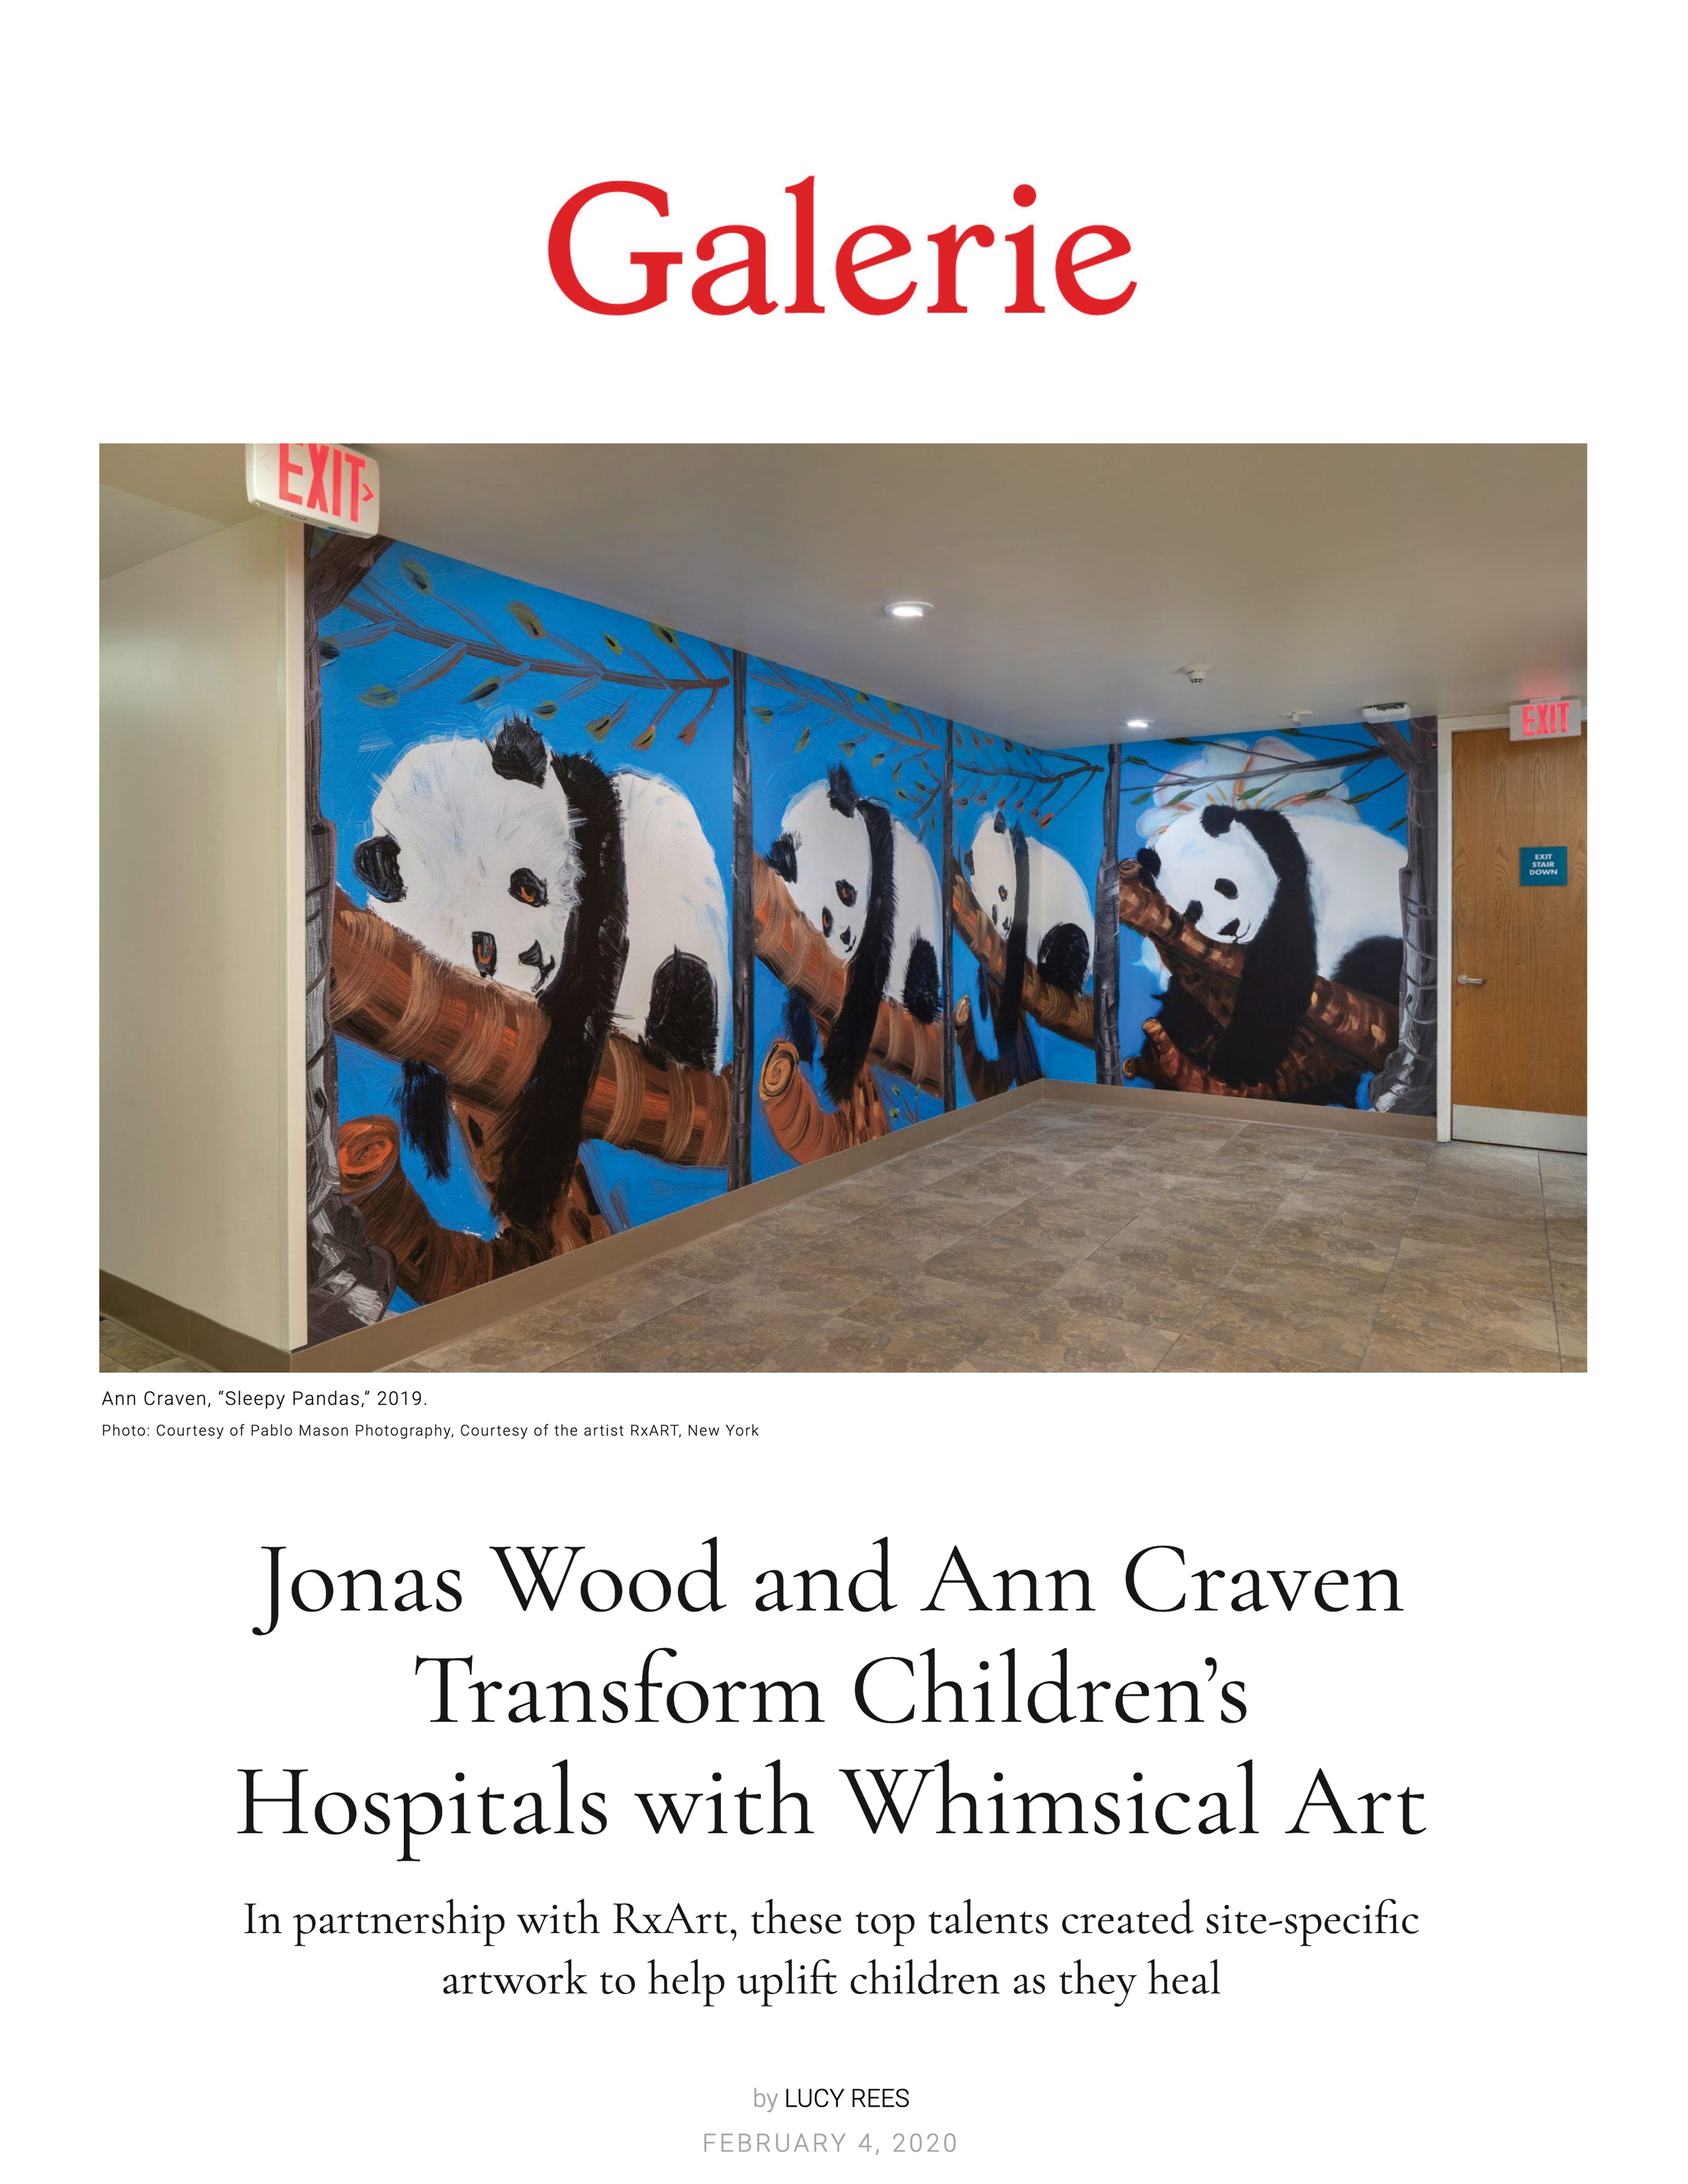 20200419_Galarie_Jonas Wood and Ann Craven Transform Children’s Hospitals with Whimsical Art